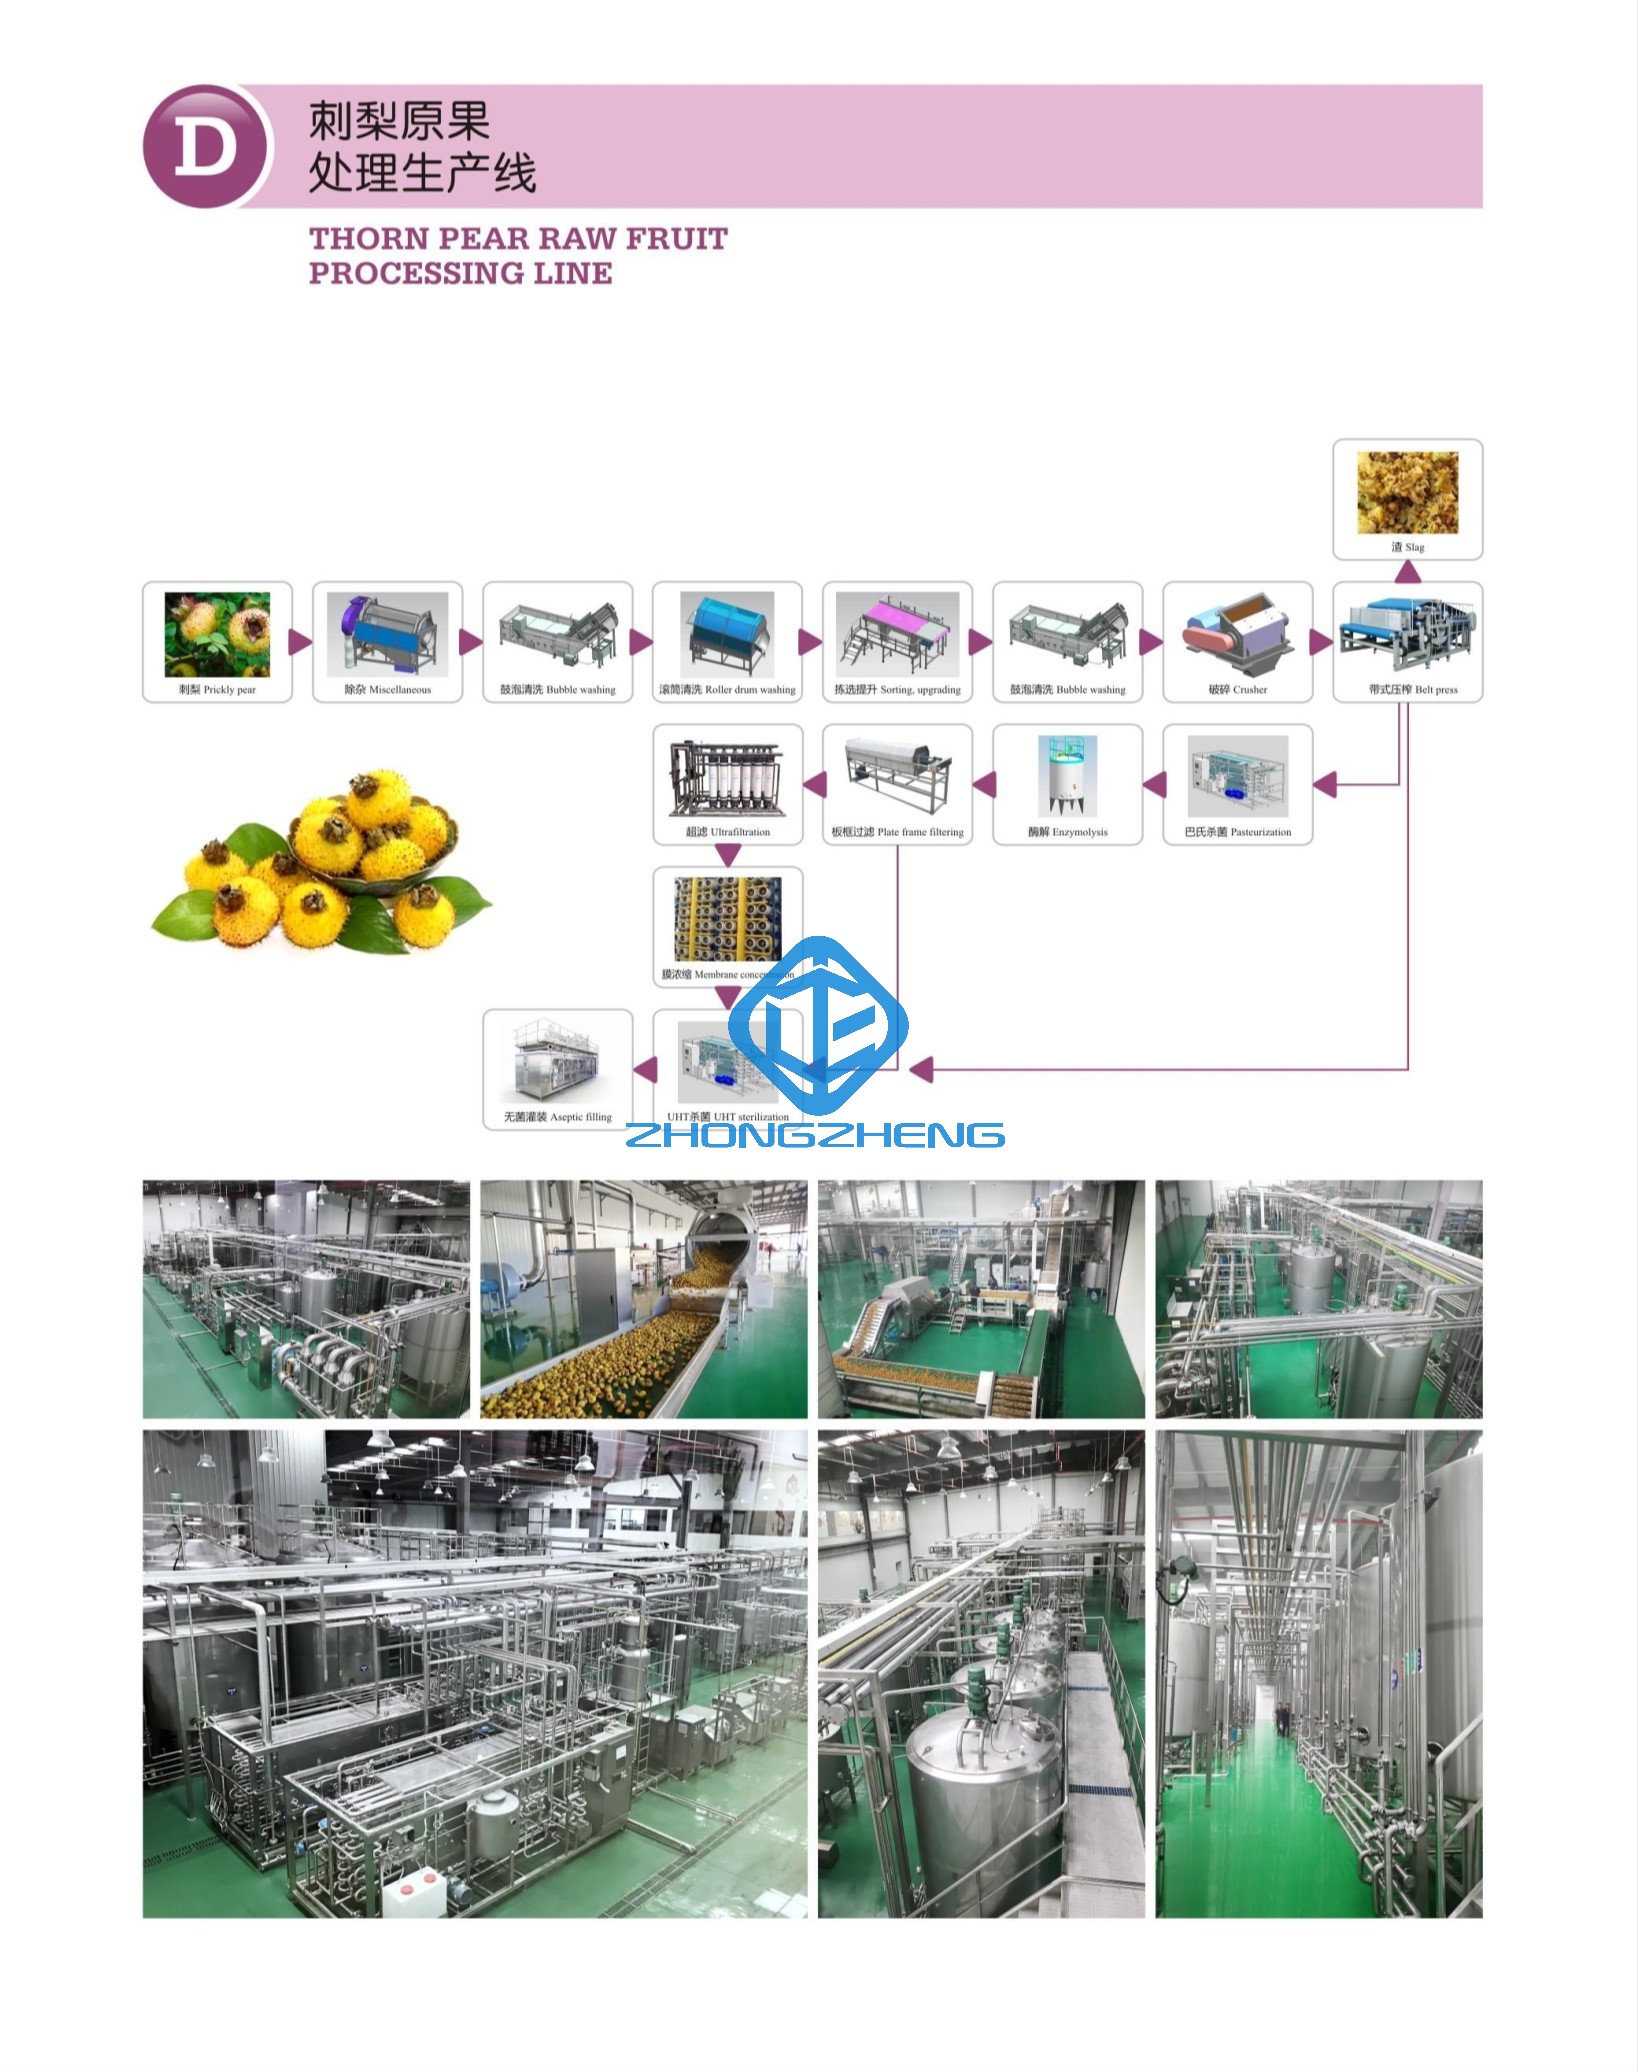 Thorn Pear Raw Fruit Processing Line